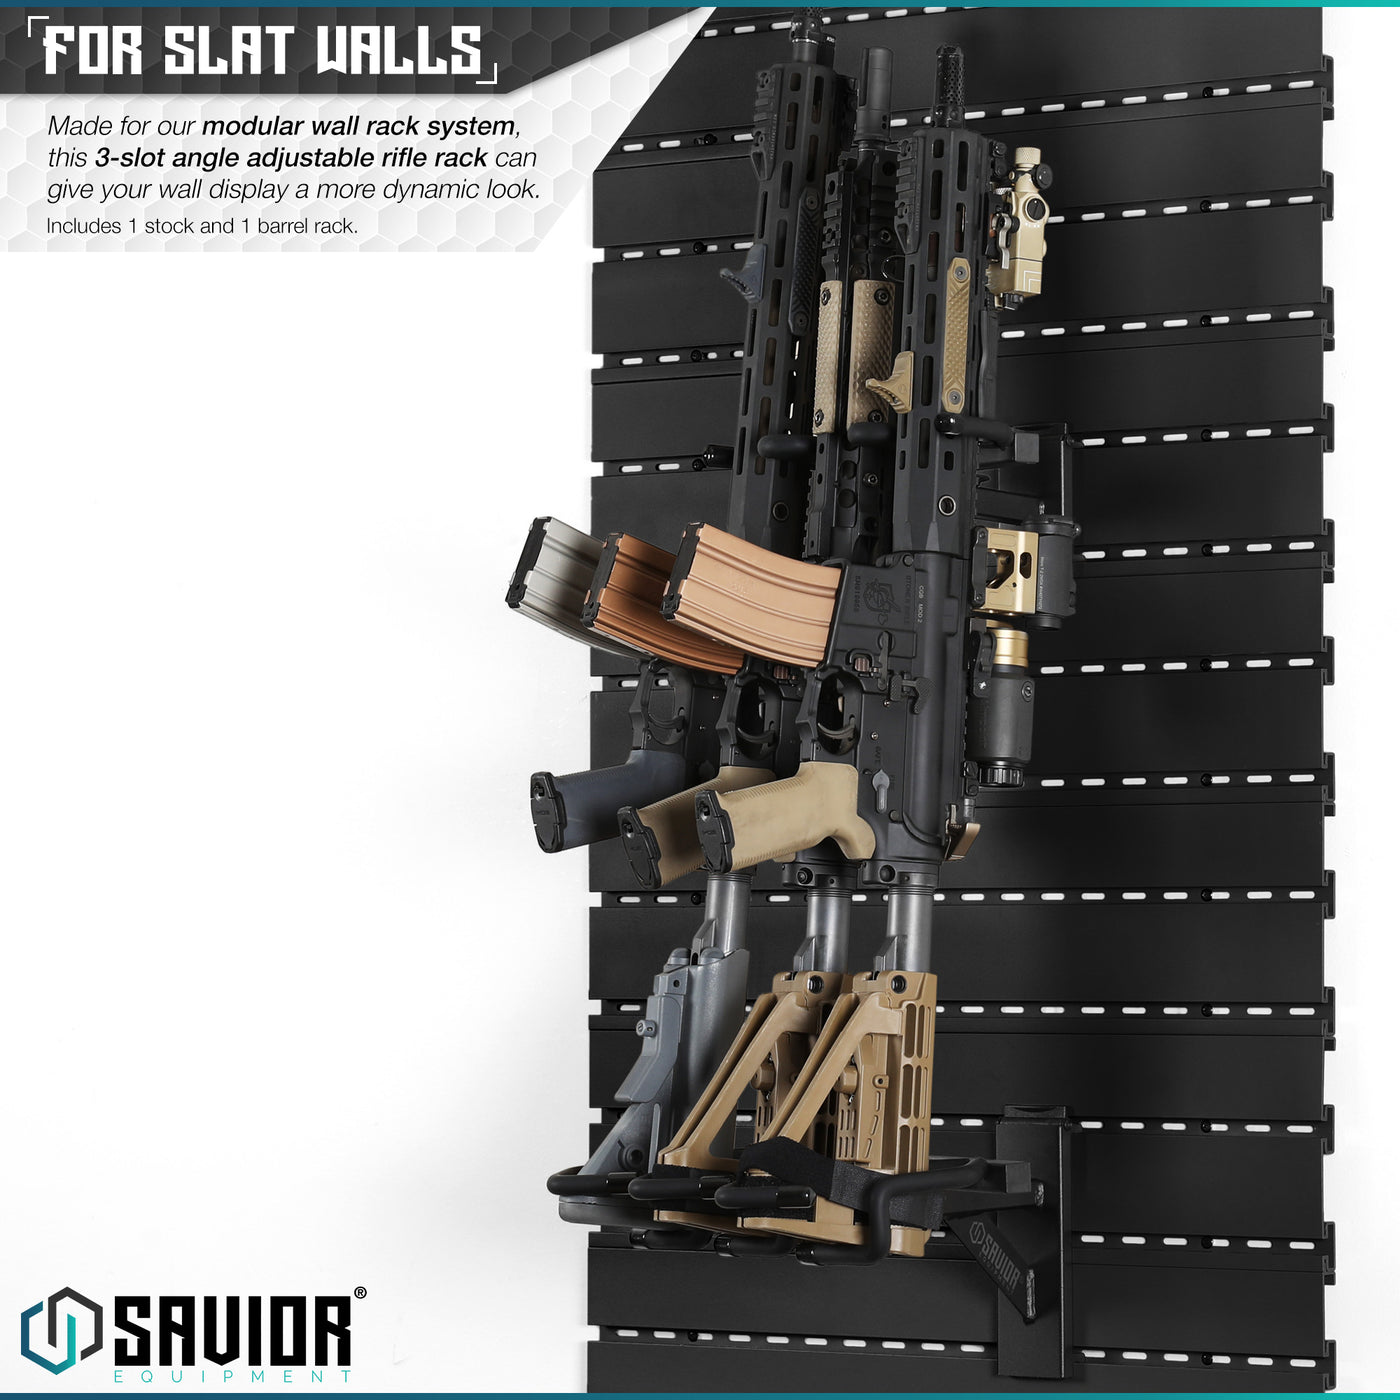 For Slat Walls - Made for our modular wall rack system, this 3-slot angle adjustable rifle rack can give your wall display a more dynamic look. Includes 1 stock and 1 barrel rack.